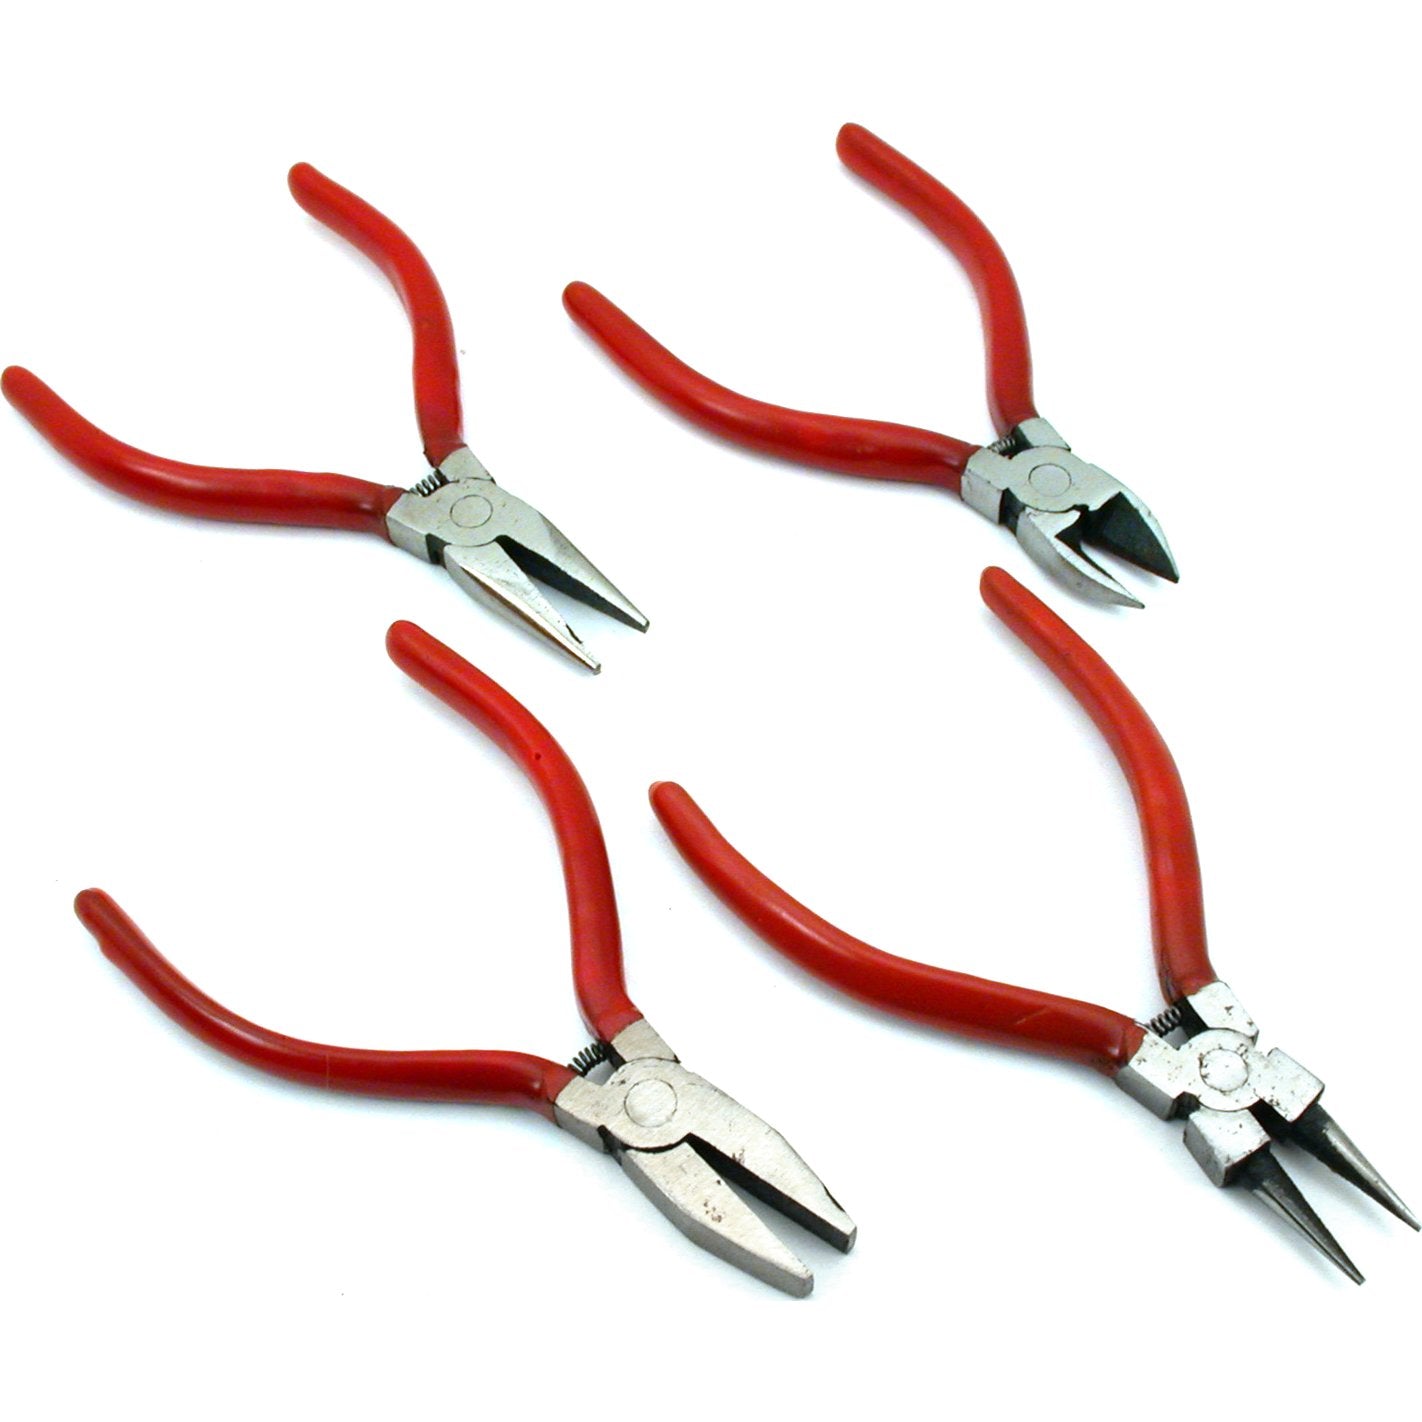 Chain Nose, Flat Nose, Round Nose Pliers & Diagonal Cutters 4Pcs